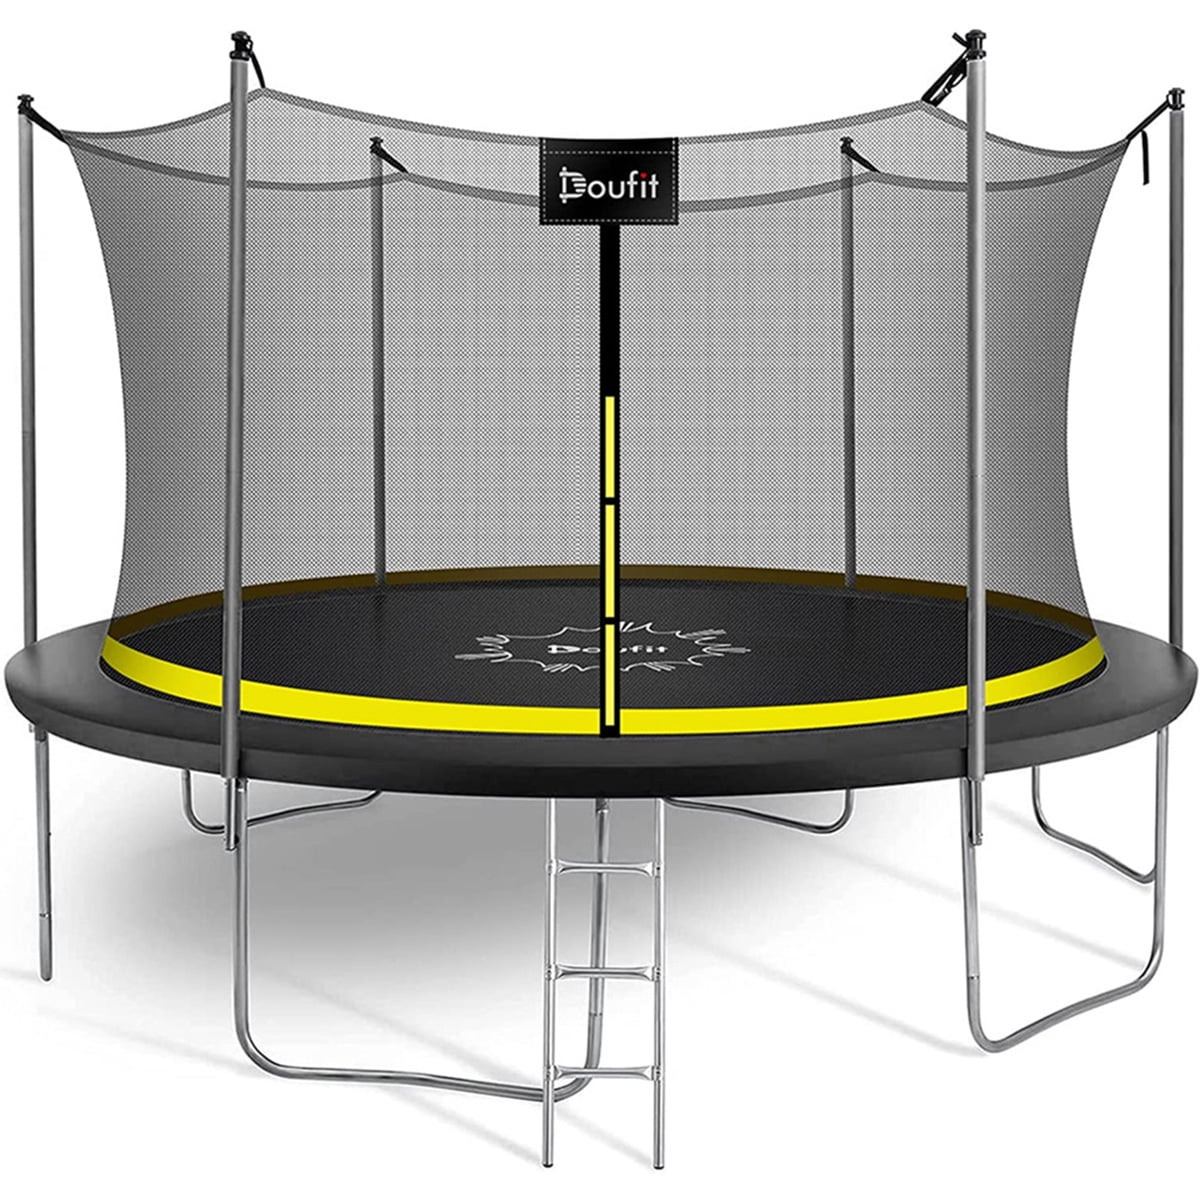 Jumping Exercise Fitness Heavy Duty Trampoline TR-06 Outdoor Recreational Rebounder Trampoline for Kids and Family Doufit 8FT 10FT 12FT Trampoline with Enclosure Net and Ladder 